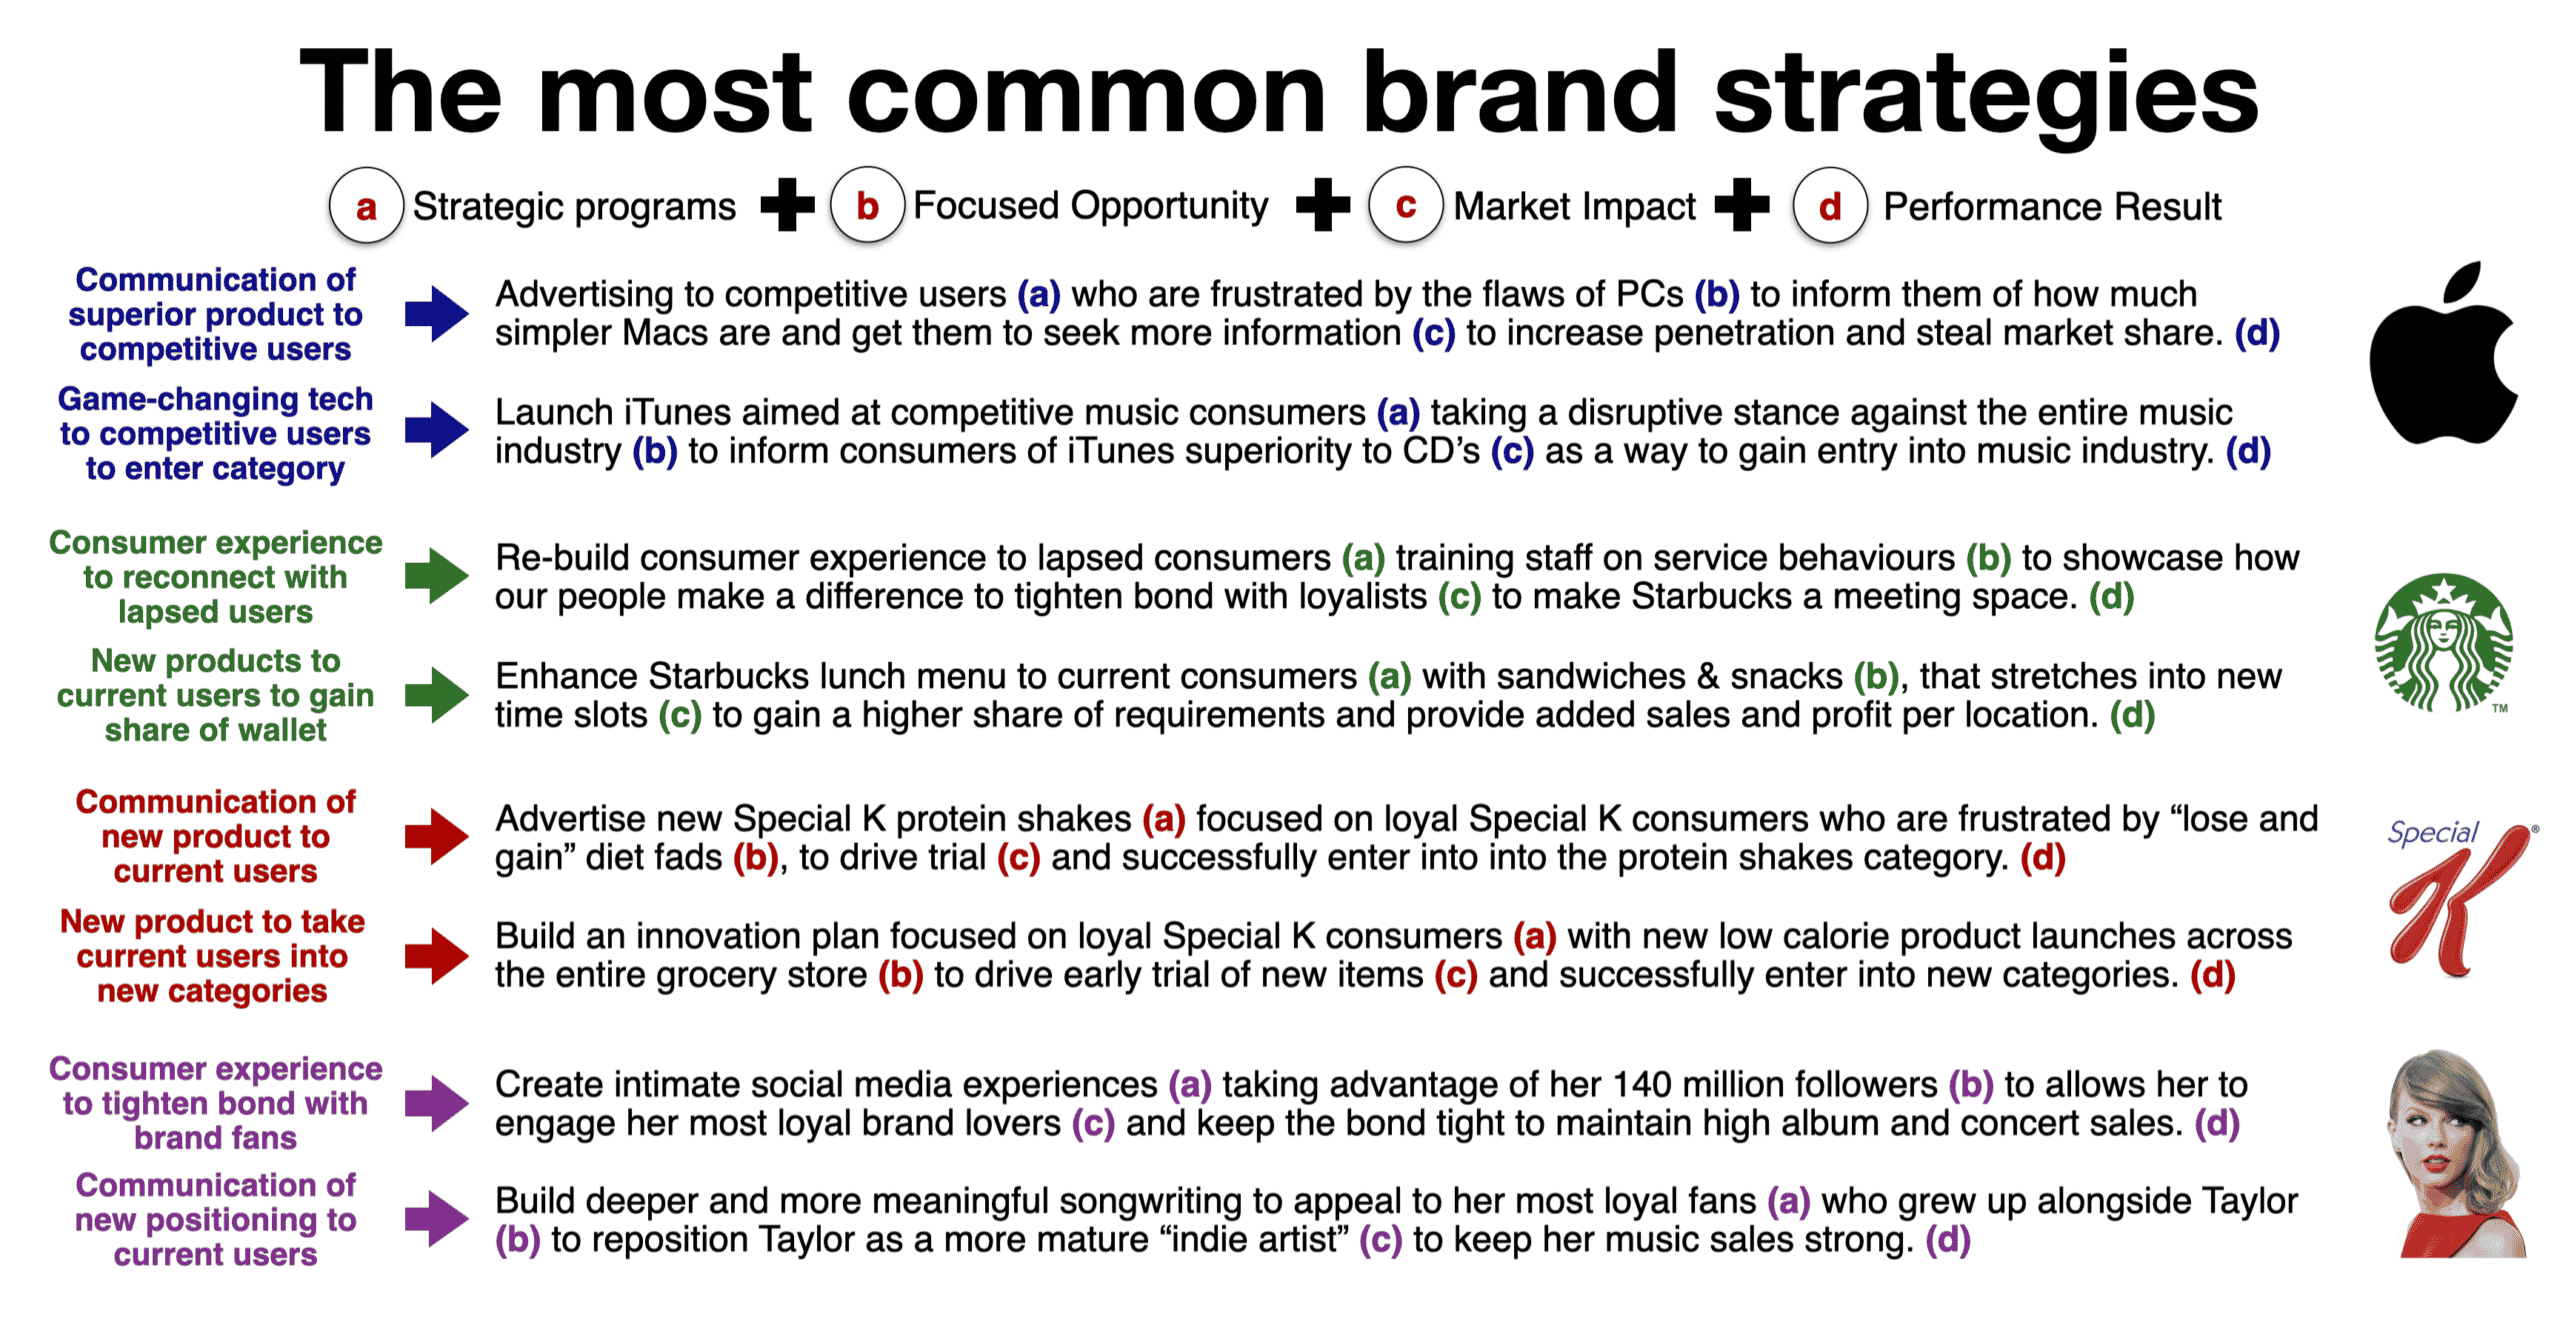 Most common brand strategy statements